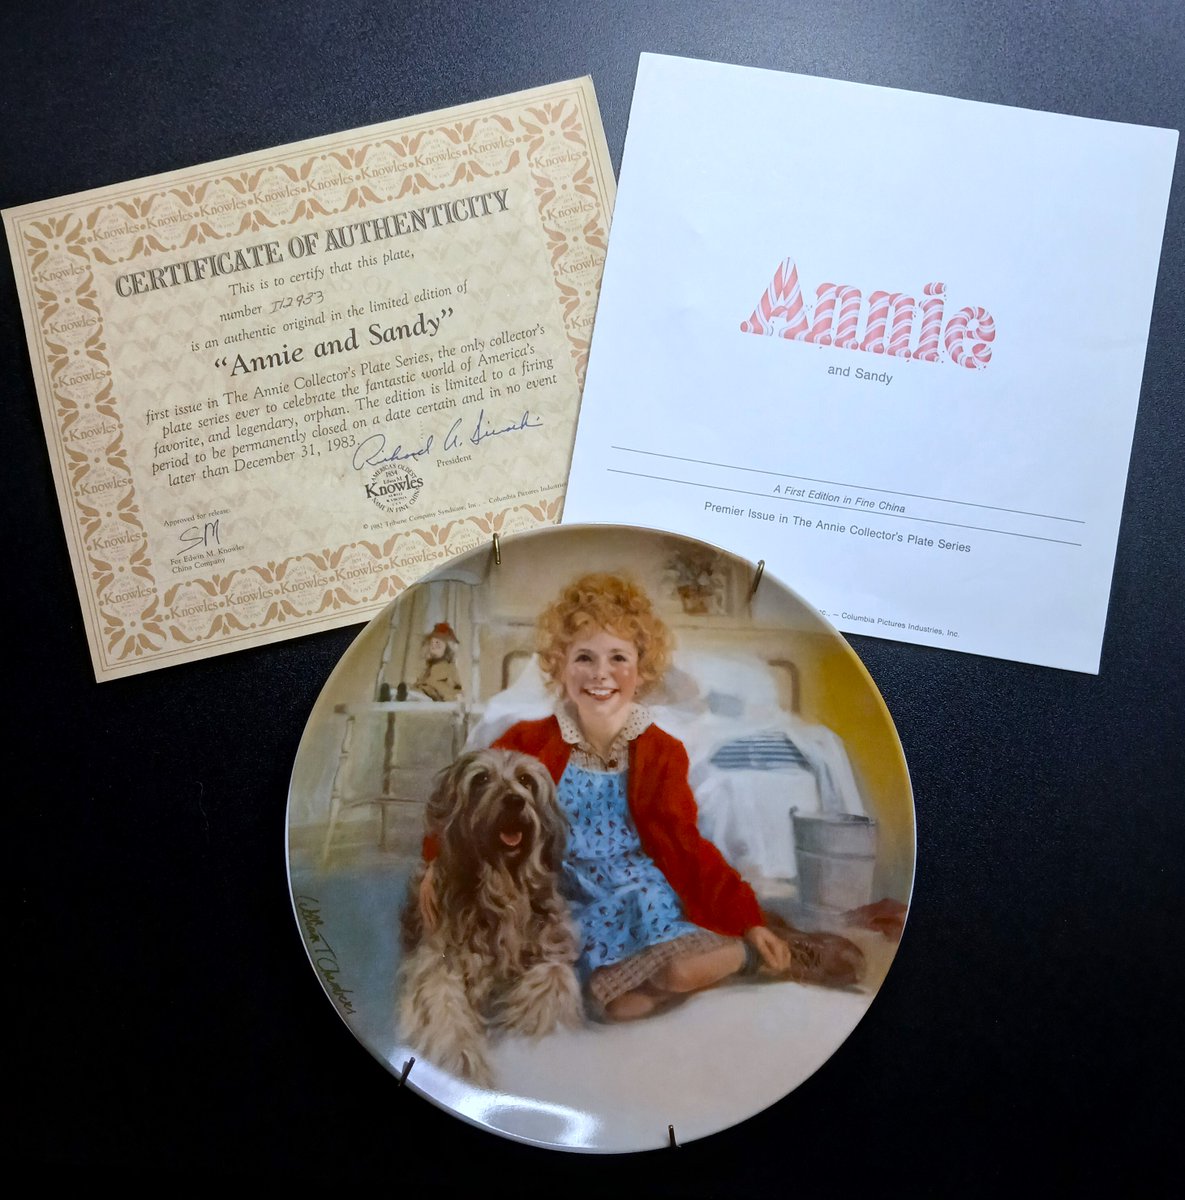 Little Orphan Annie and Sandy Collector Plate First Issue Edwin M Knowles 1982 #LittleOrphanAnnie #AnnieAndSandy #Collector #Plate #First #Issue #EdwinMKnowles #1980s #Ebay #CynfulThings ebay.com/itm/3353632897…